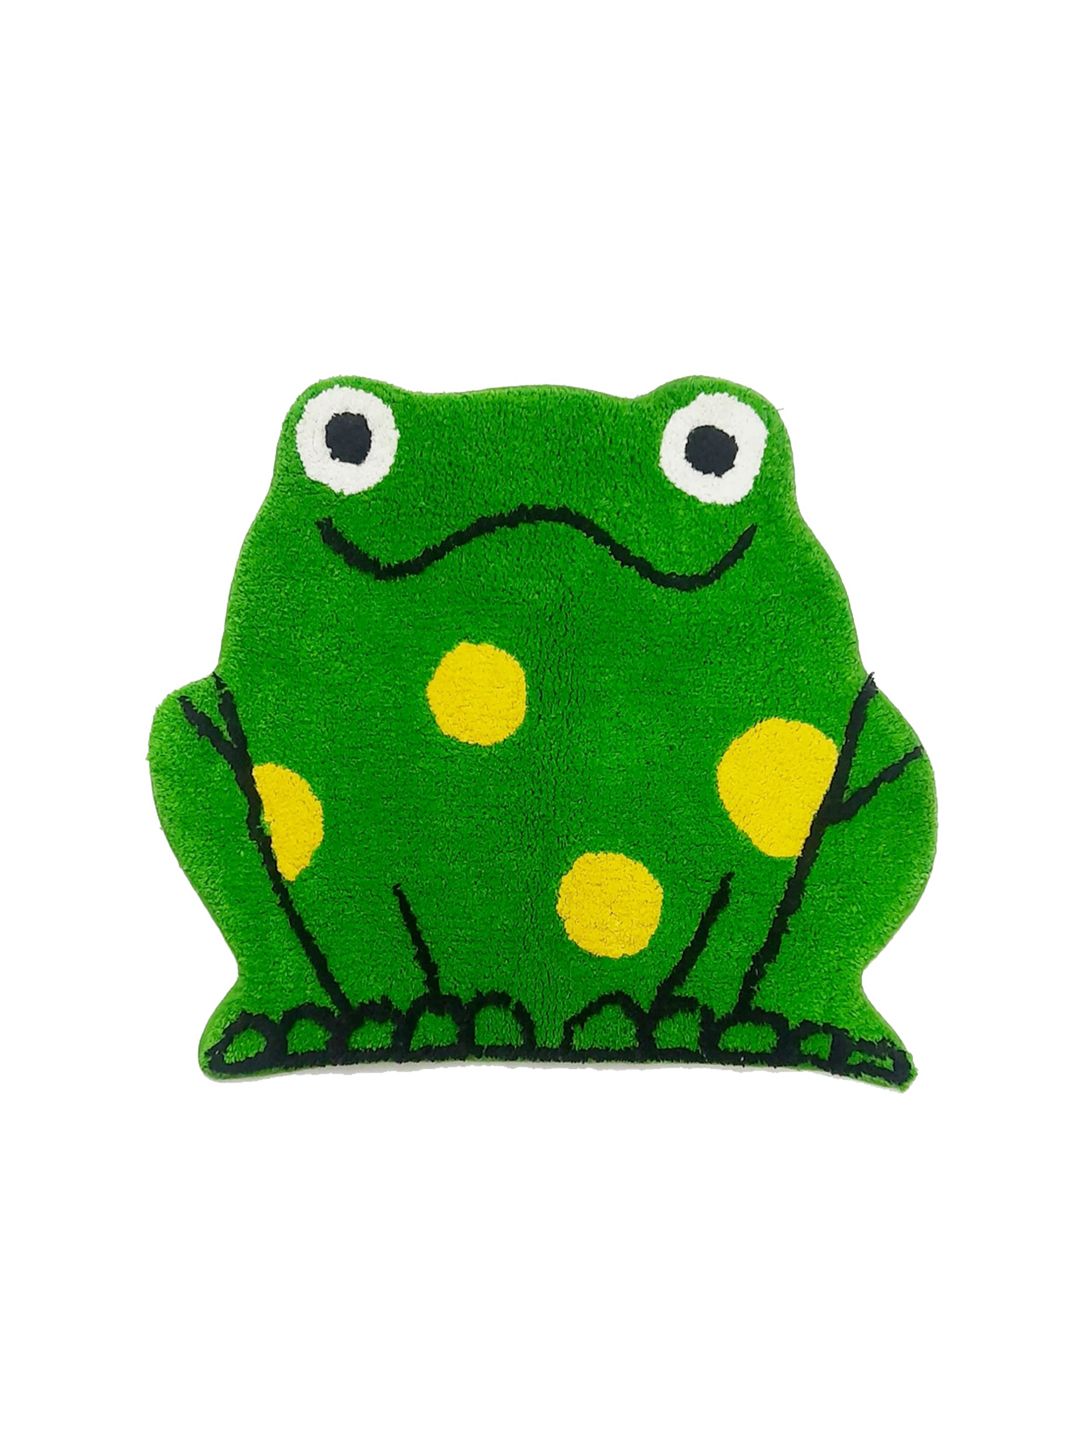 SWHF Kids Green Frog Shaped Rug and Mat Price in India